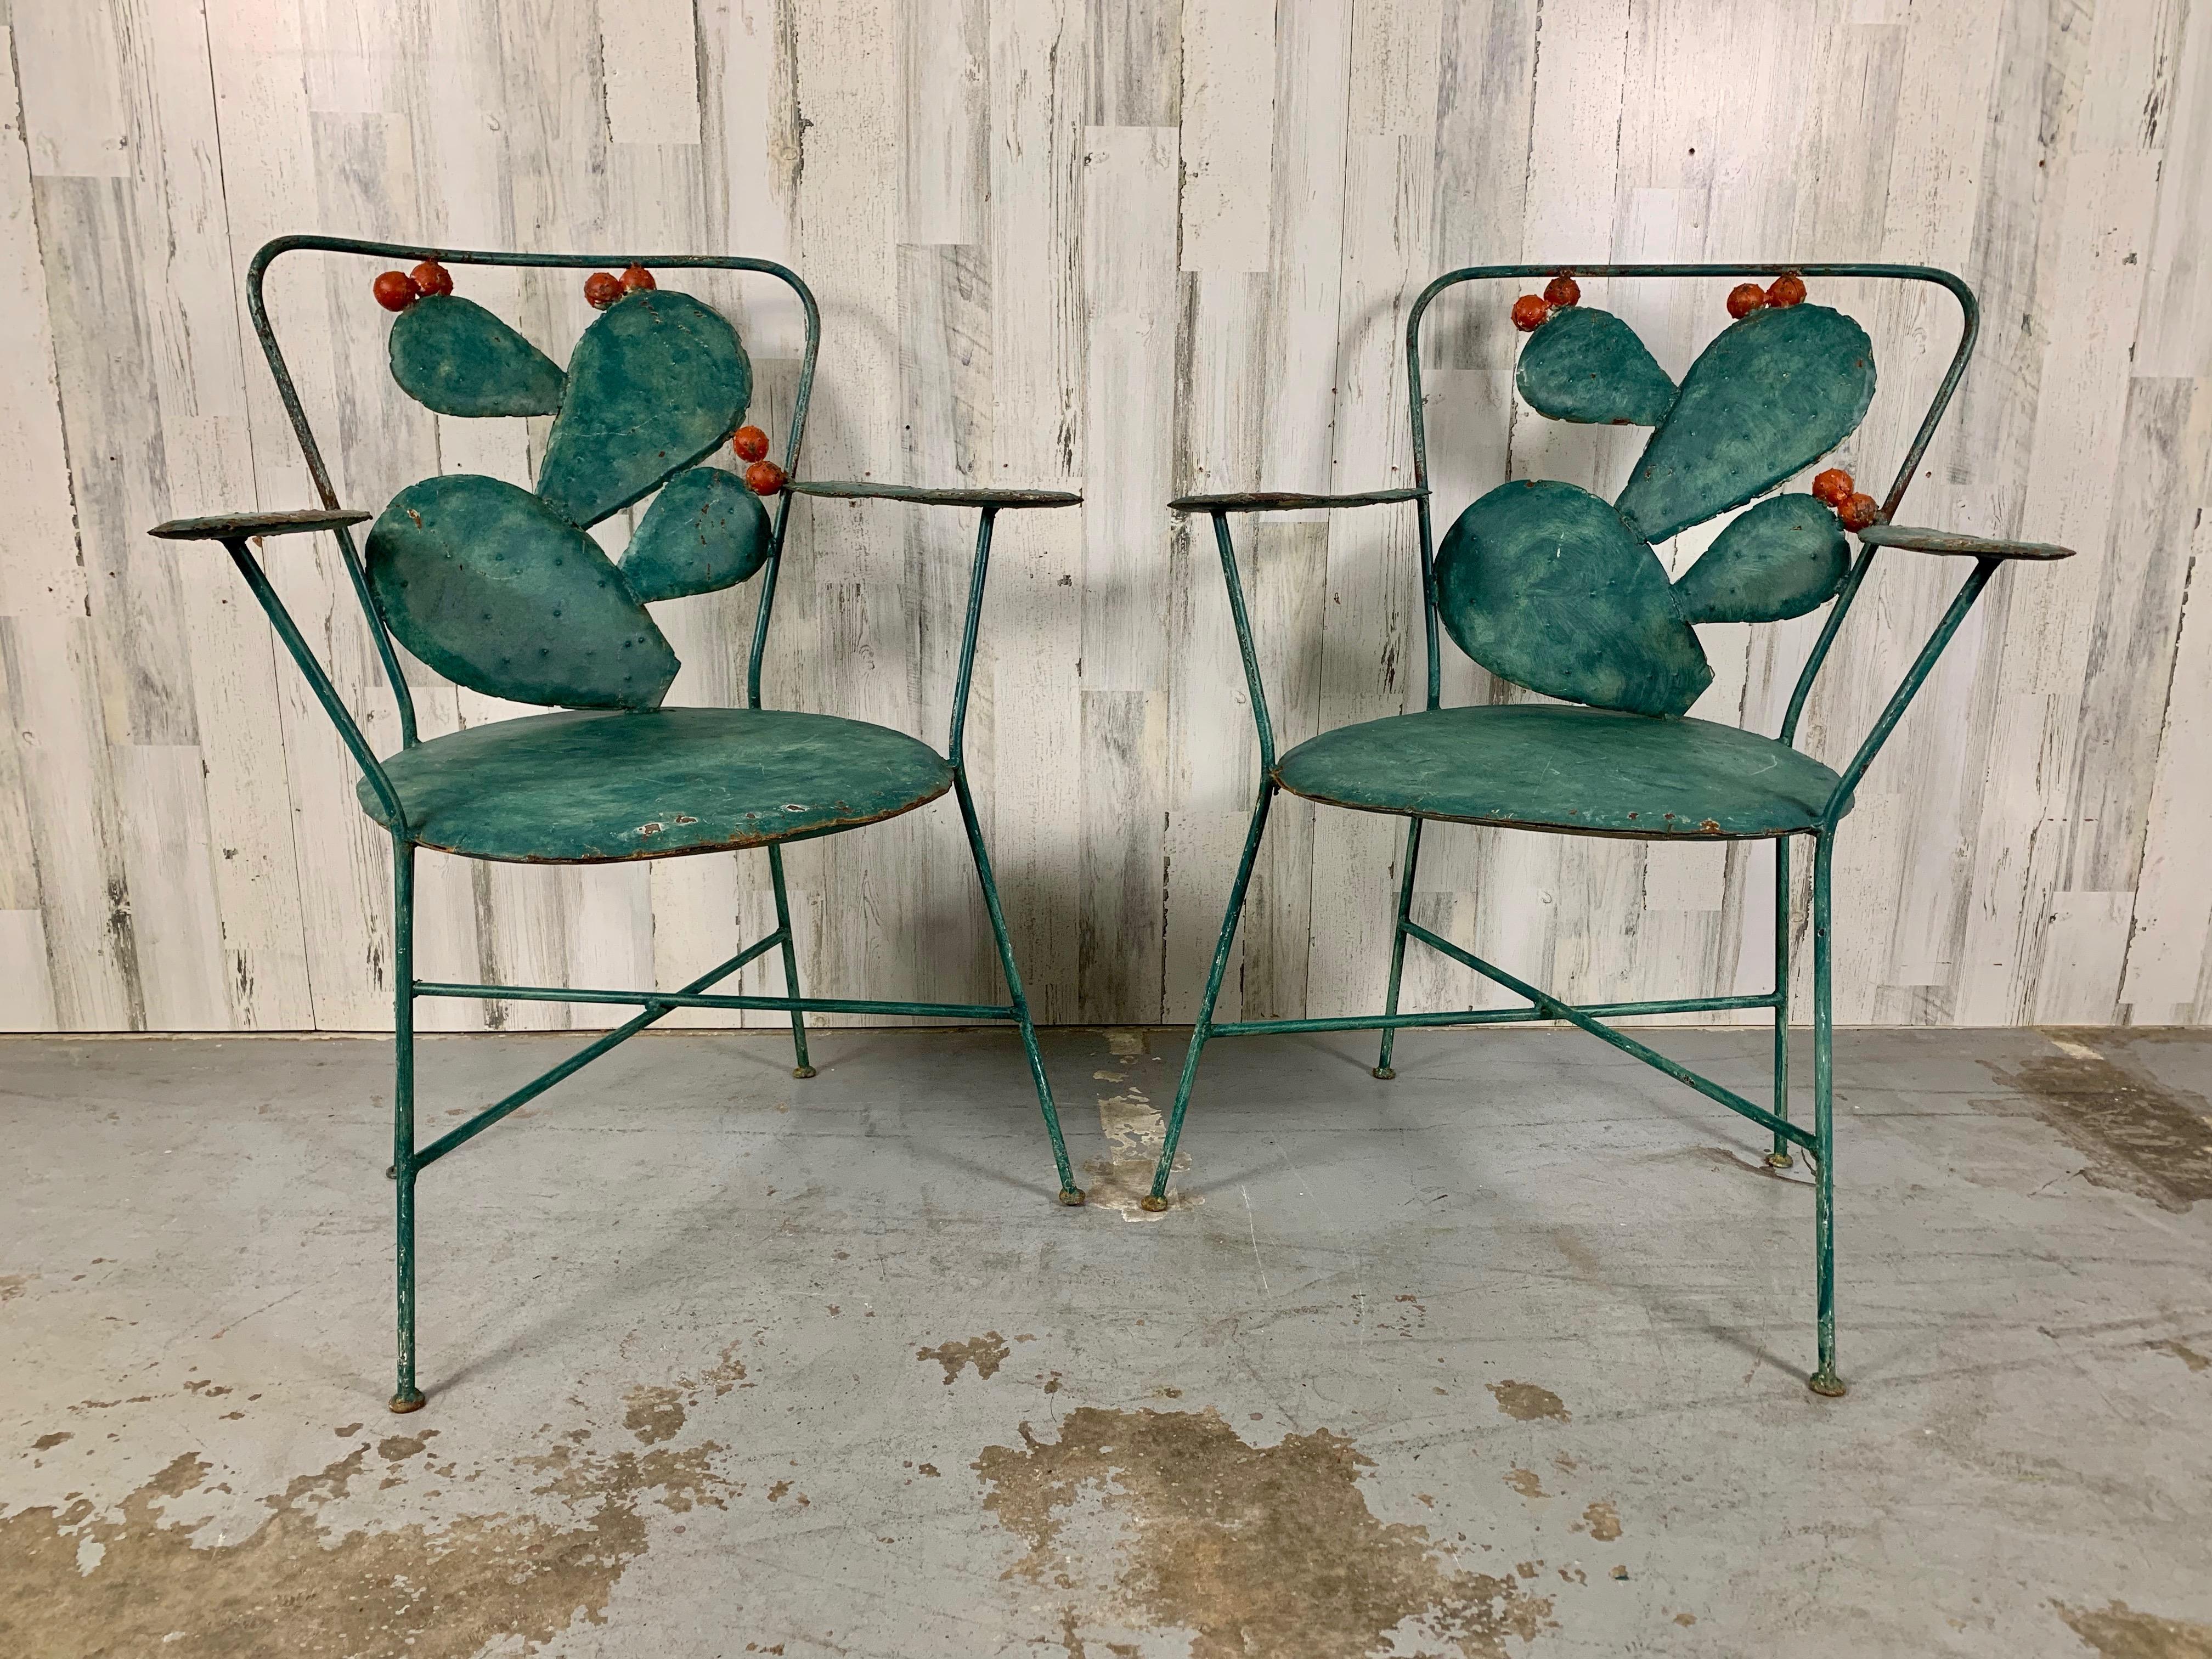 Abstract Cactus with flower buds patio chairs. Folk art for the garden or in the sunroom, Mid century styling with X base stretcher sold as a pair.